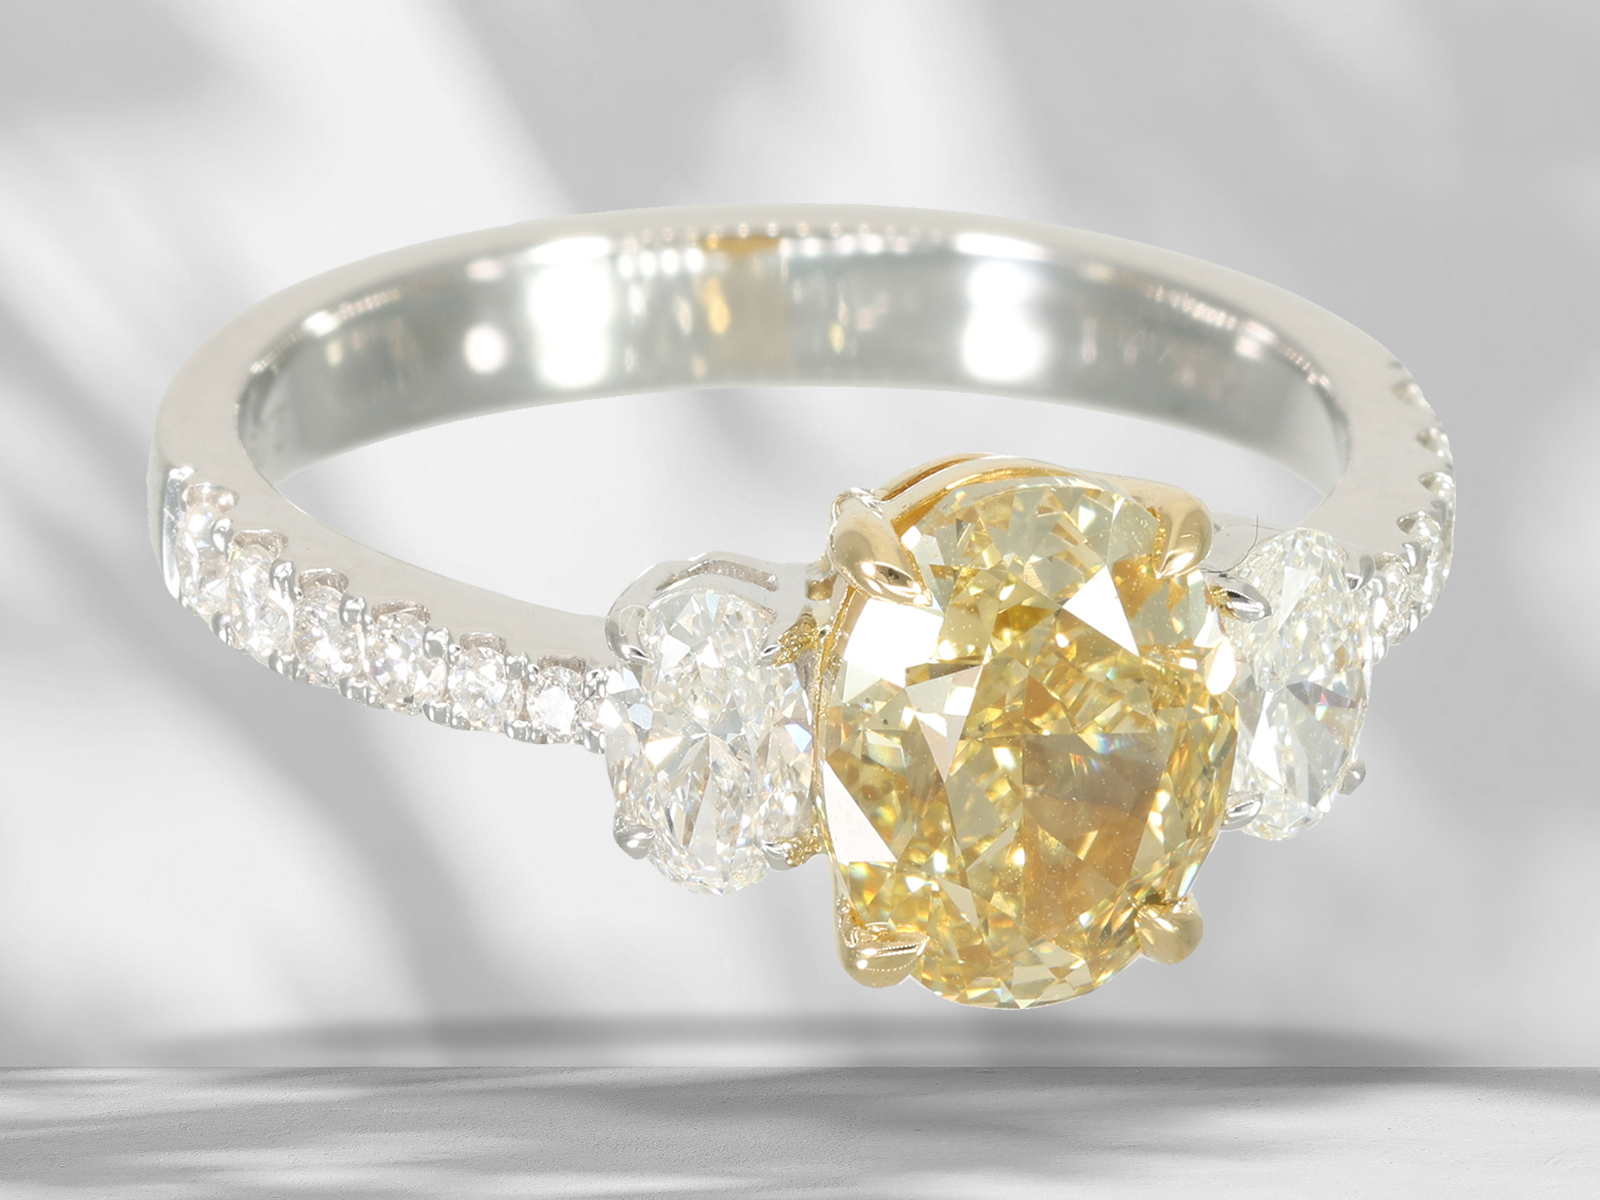 Ring: high-quality fancy diamond ring, centre stone 2.09ct - Image 3 of 6